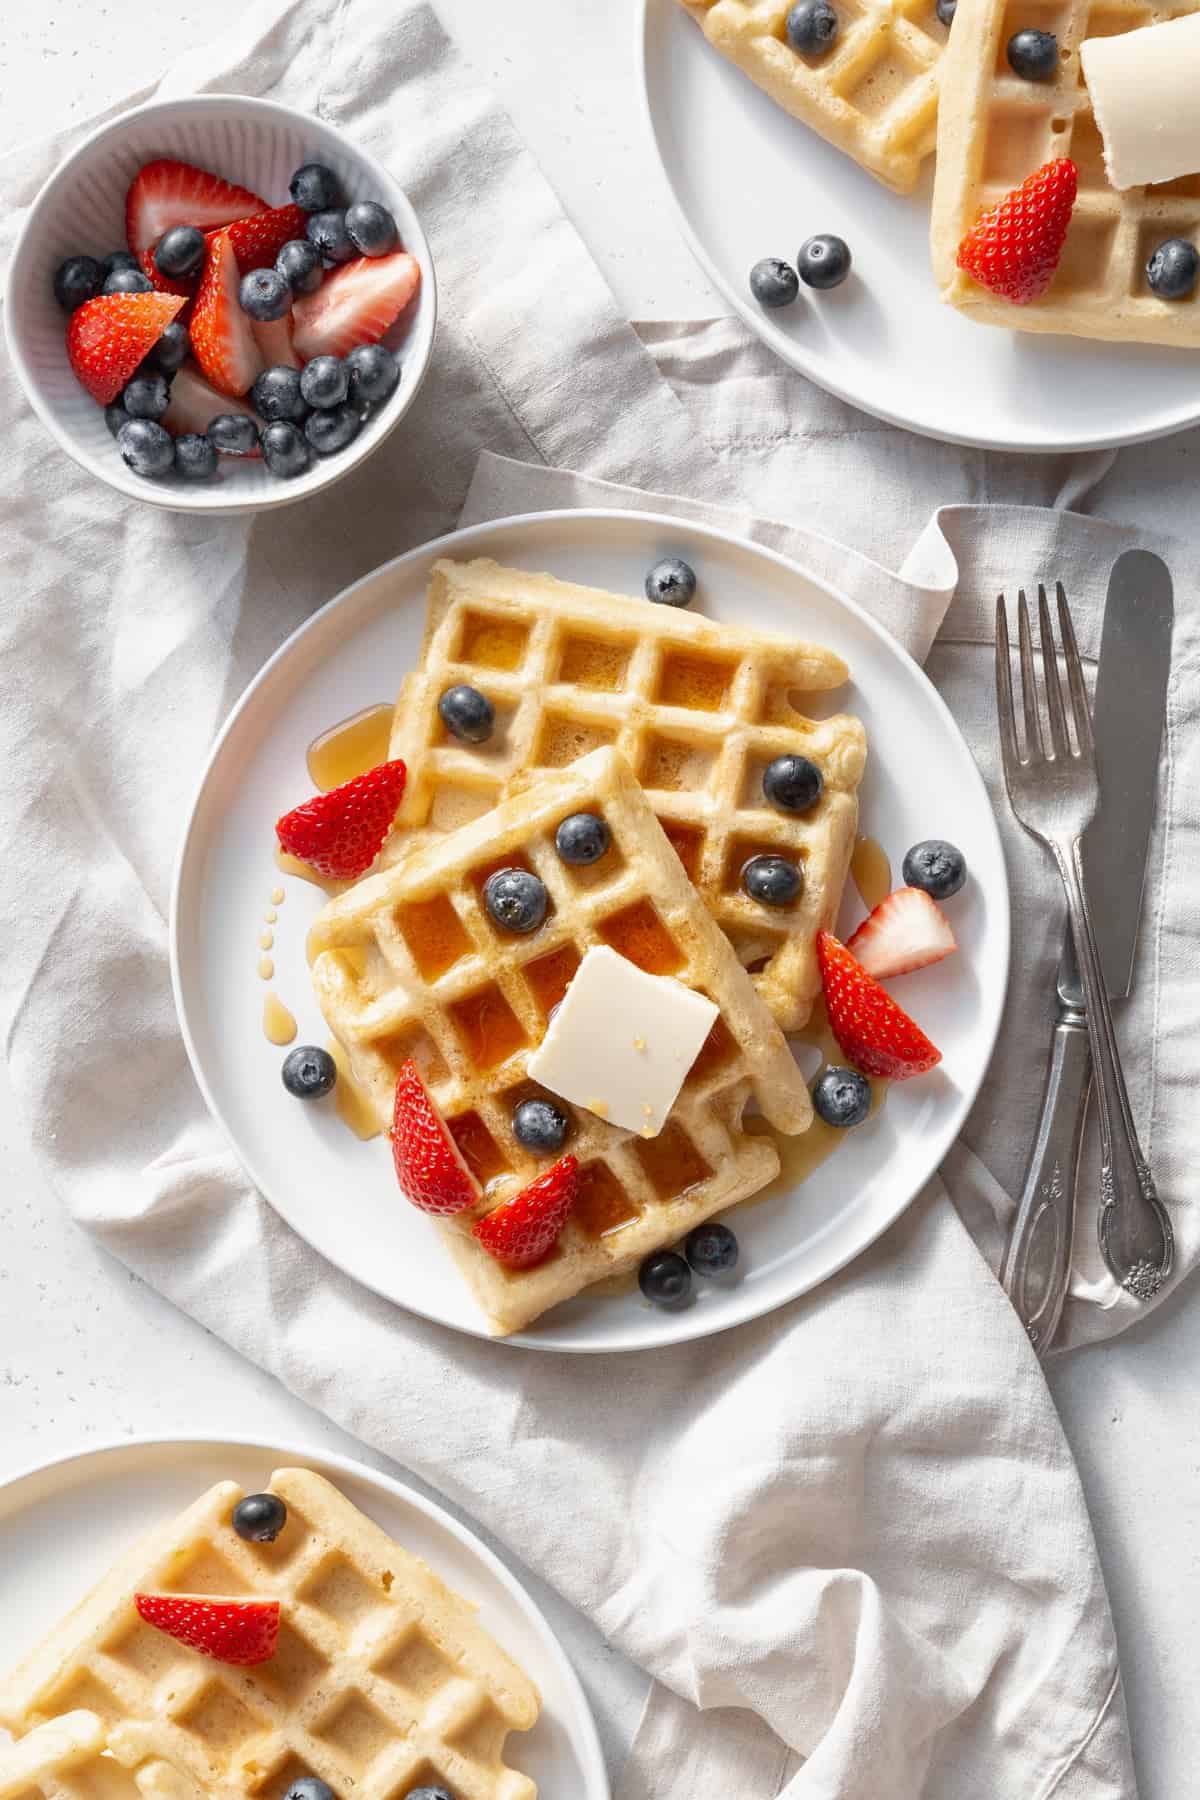 Plates of gluten-free waffles with butter and berries with a bowl of berries on the side.